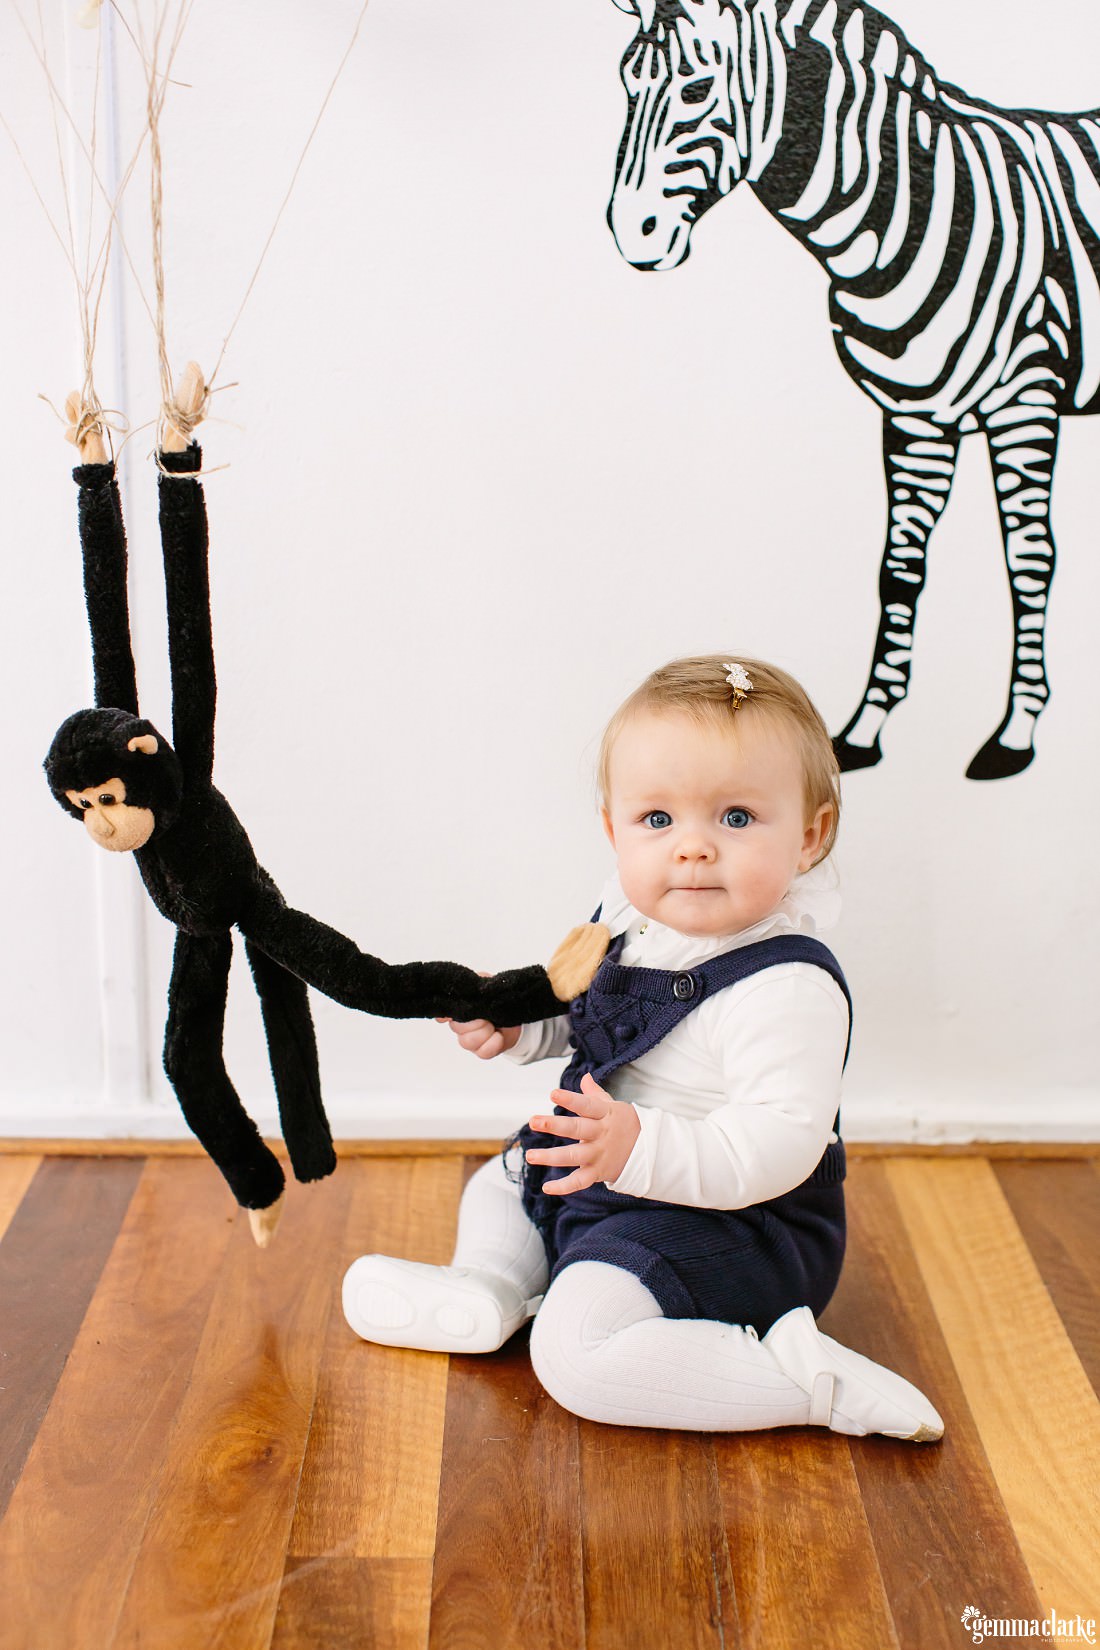 There is a toy monkey with long arms and legs that is attached to helium balloons which is making him float and Florence has grabbed his leg and smiles for the camera.